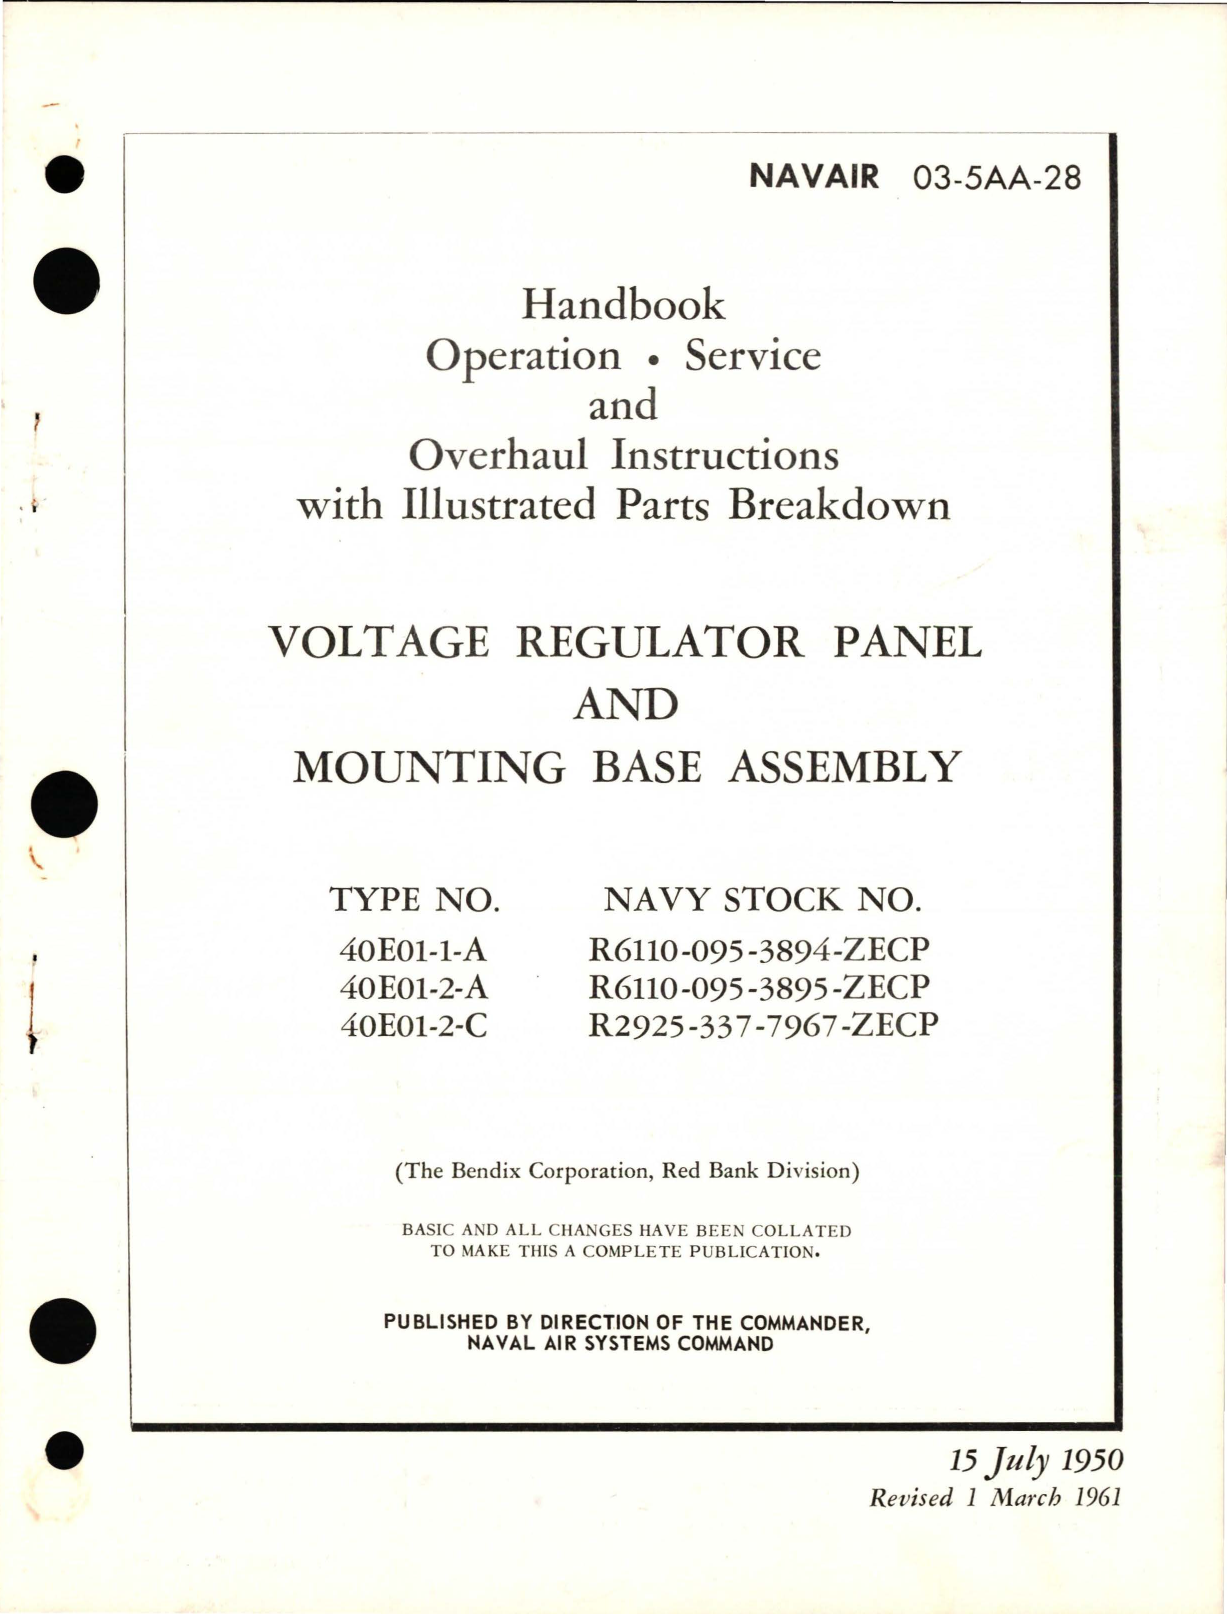 Sample page 1 from AirCorps Library document: Operation, Service, and Overhaul Instructions with Illustrated Parts Breakdown for Voltage Regulator Panel and Mounting Base Assembly 